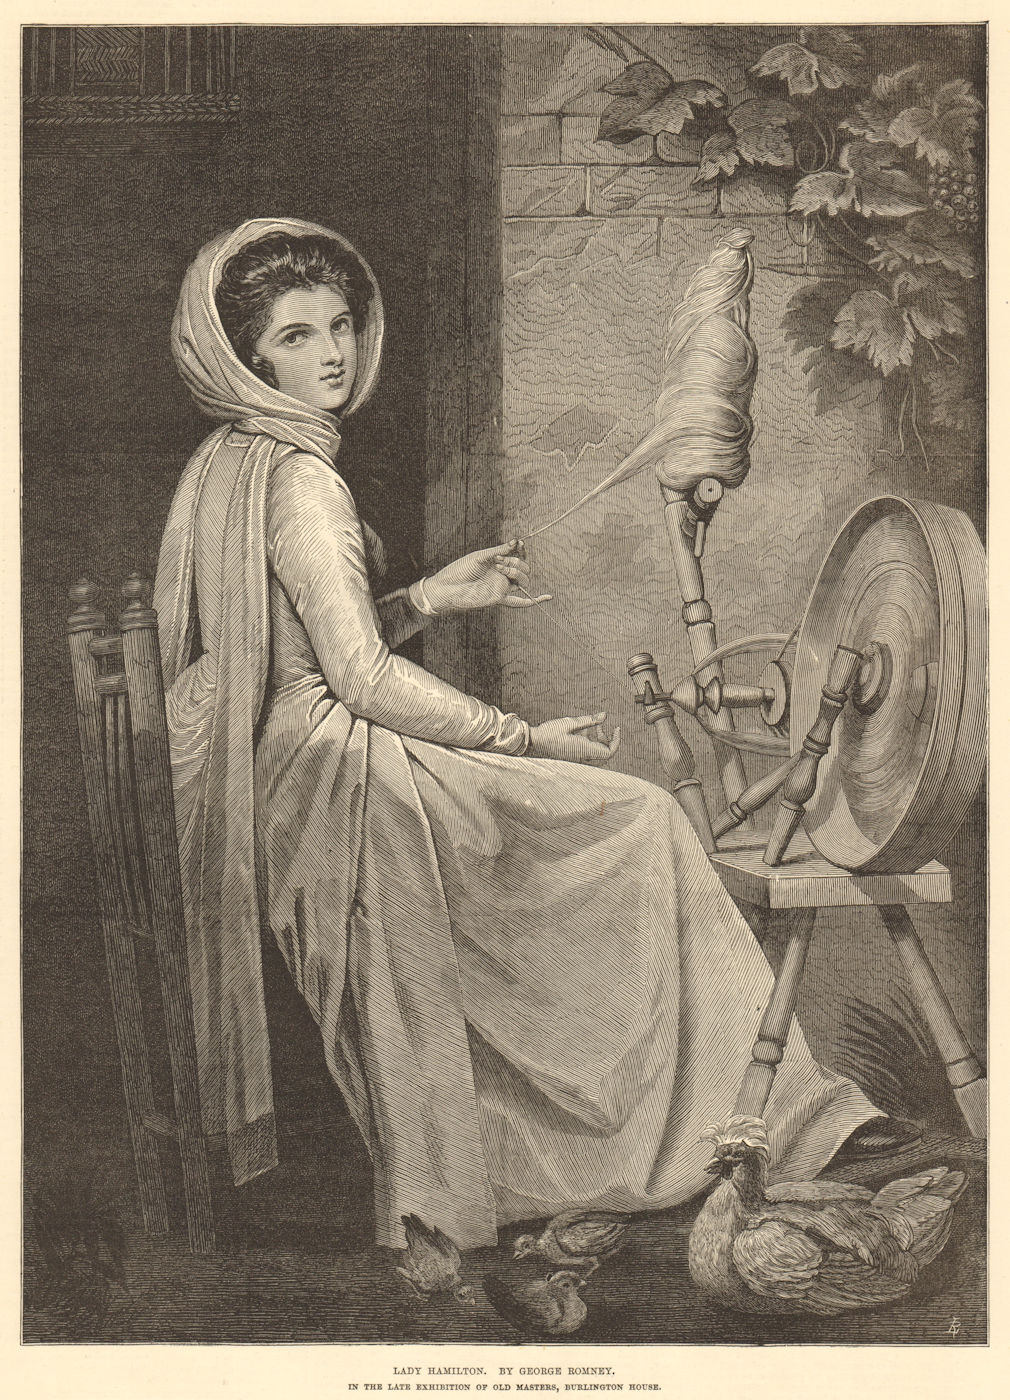 Associate Product Lady Hamilton, by George Romney. Ladies. Spinning wheel 1876 old antique print